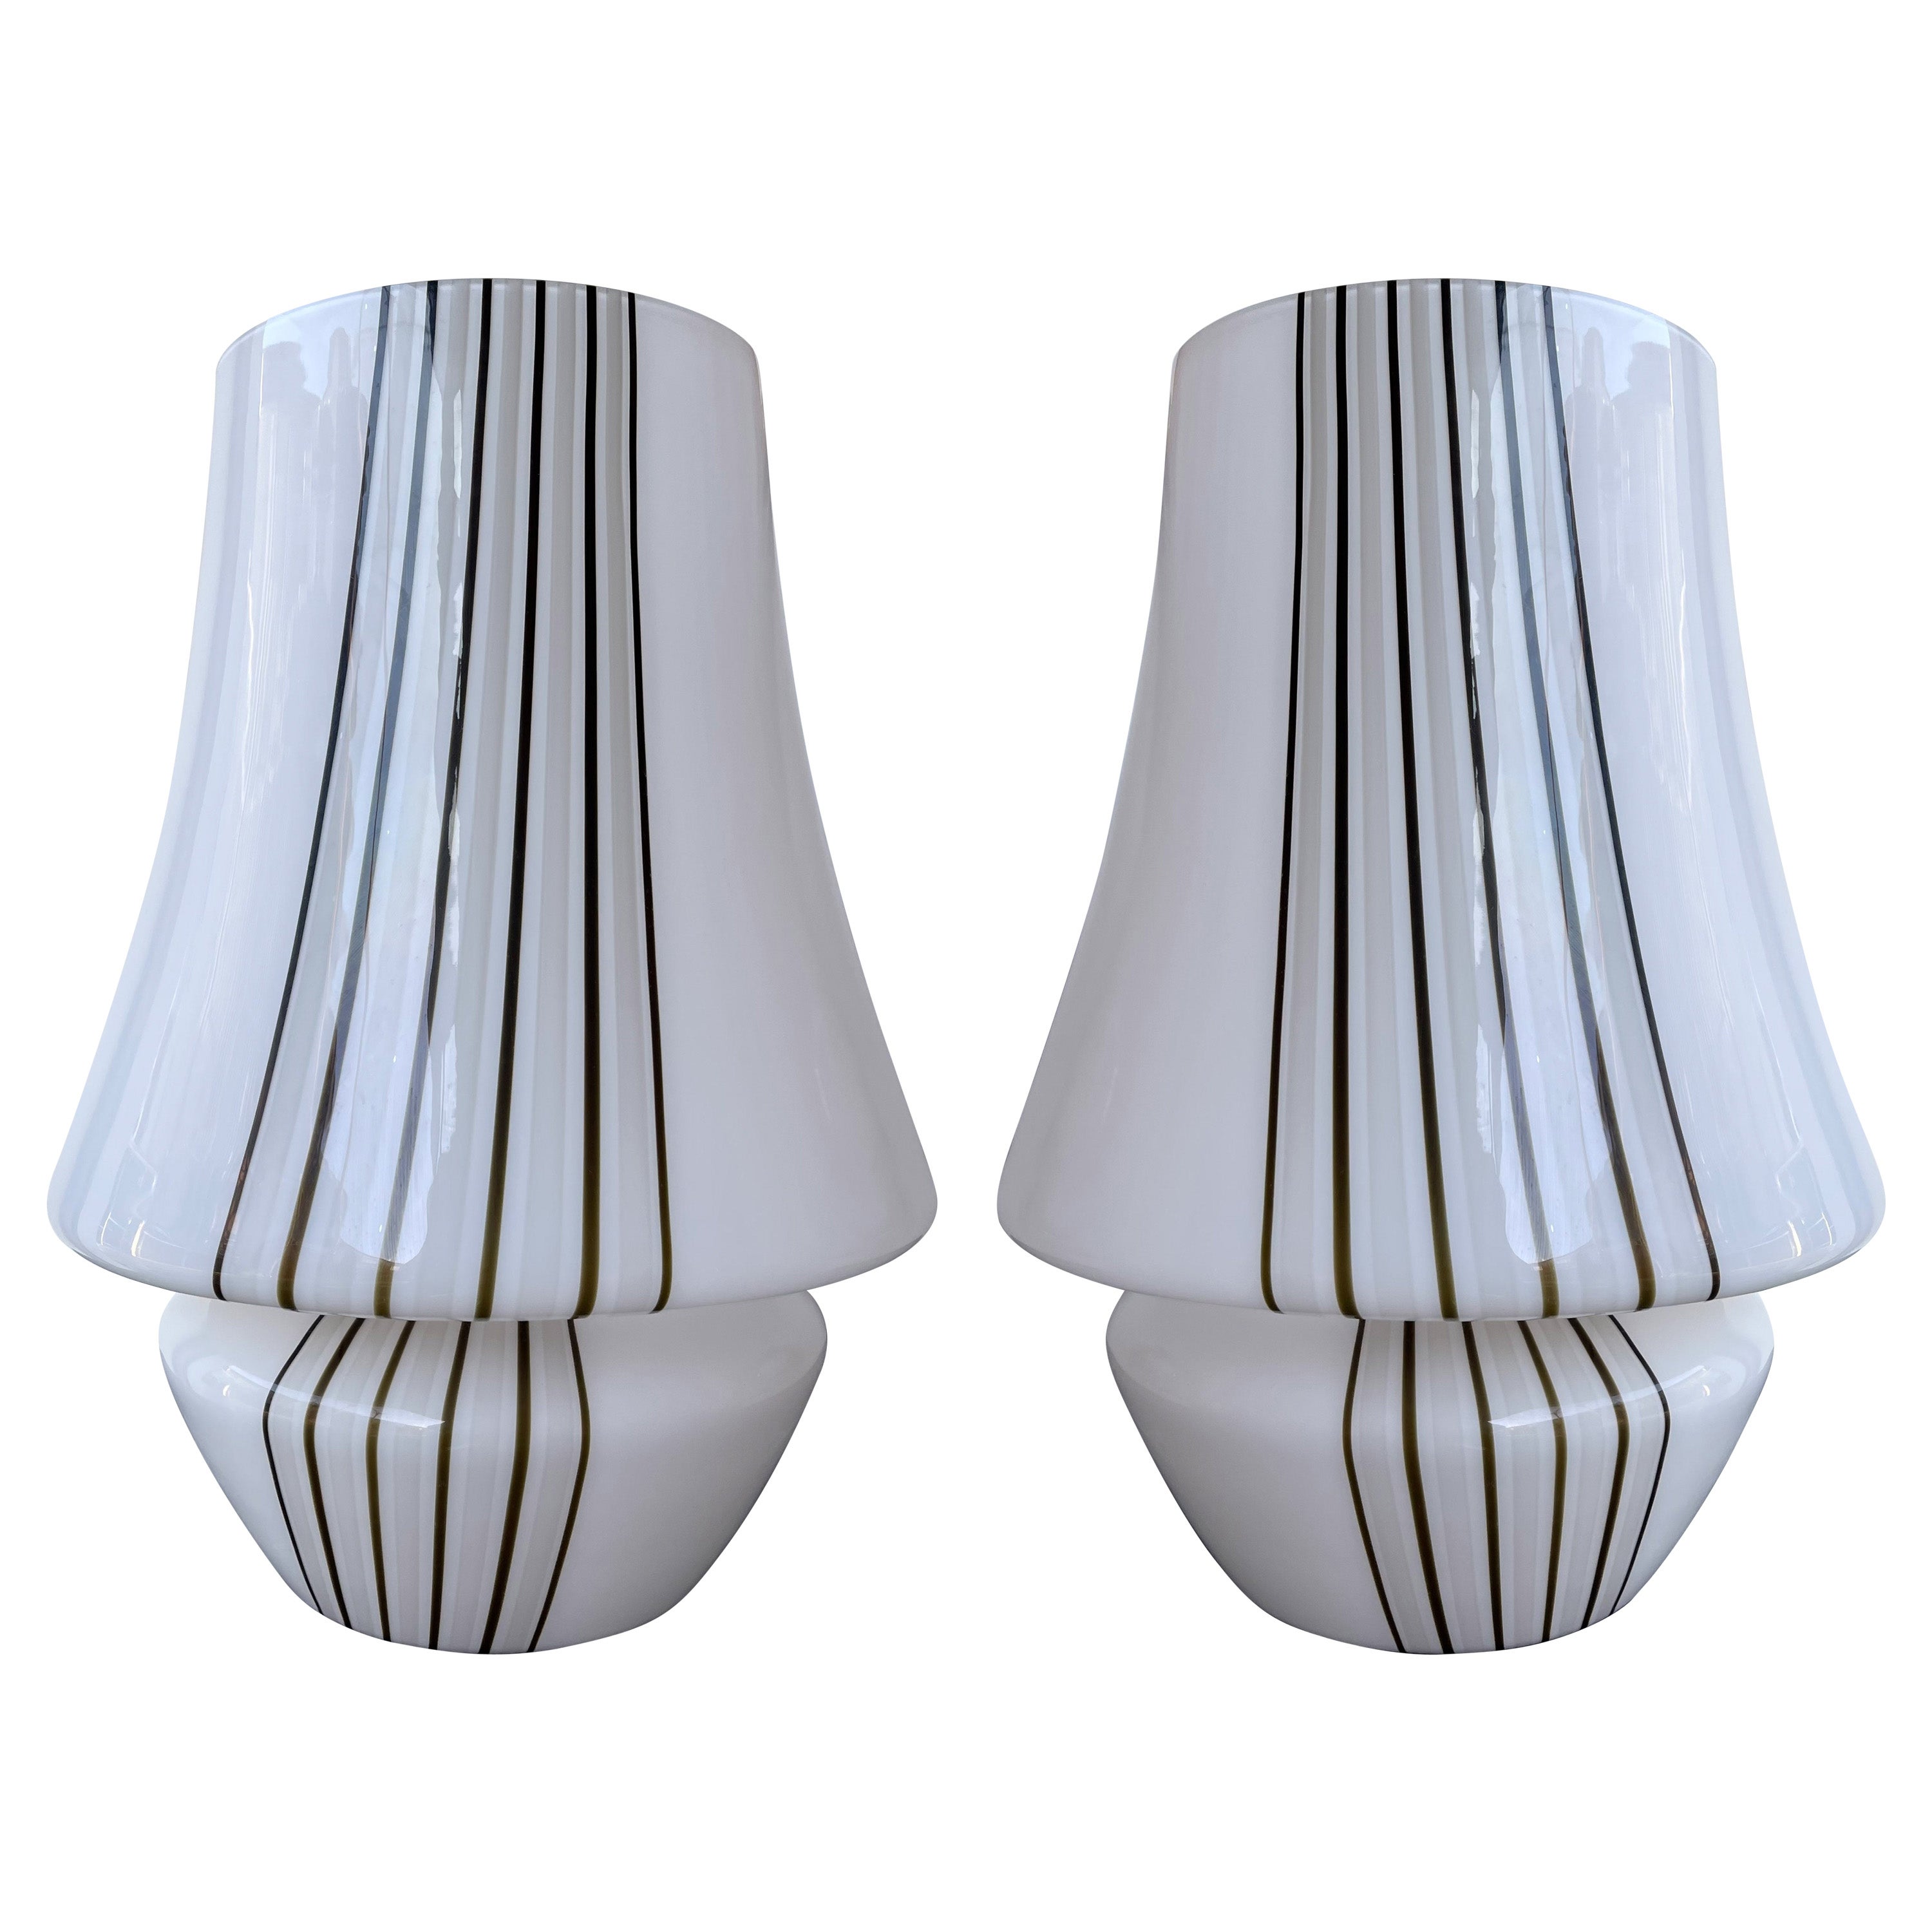 Pair of Large Stripe Murano Glass Lamps, Italy, 1970s For Sale